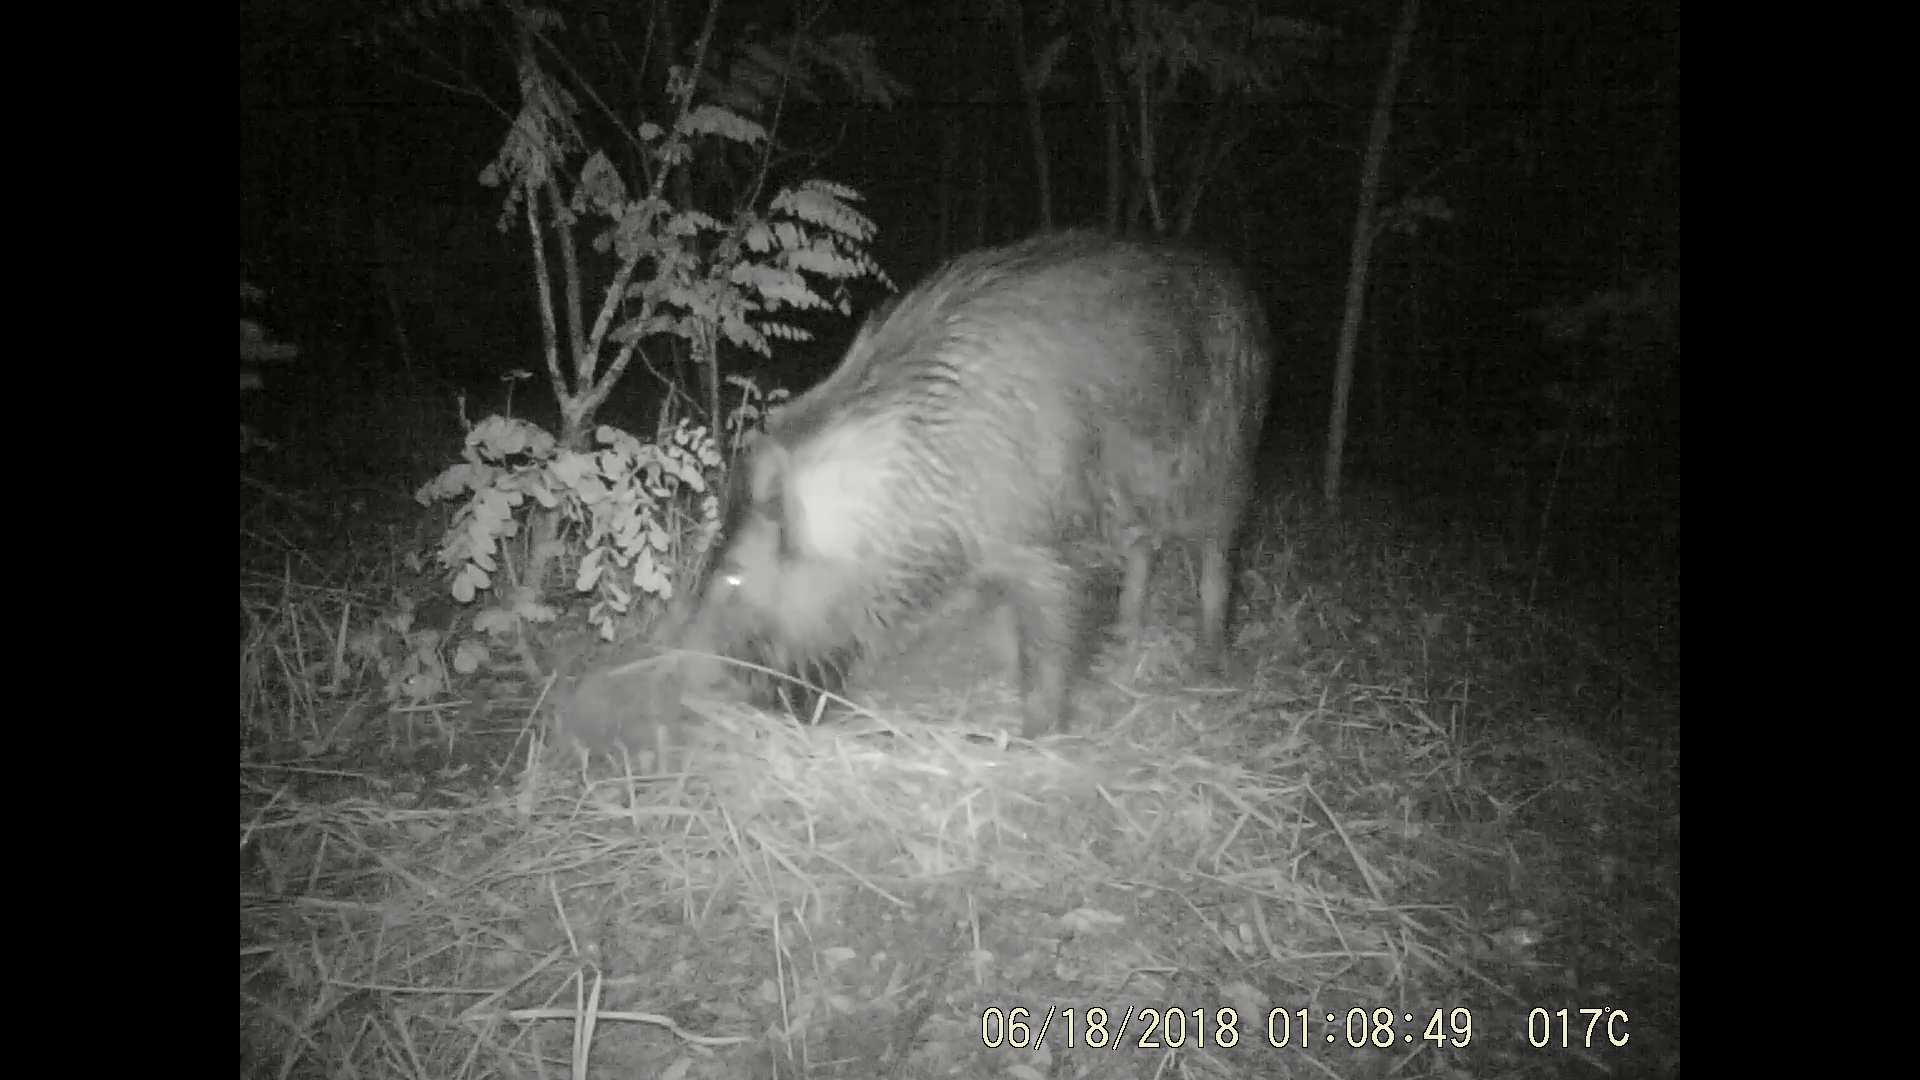 Monitoring of mammal nocturnal habits through the installed cameras